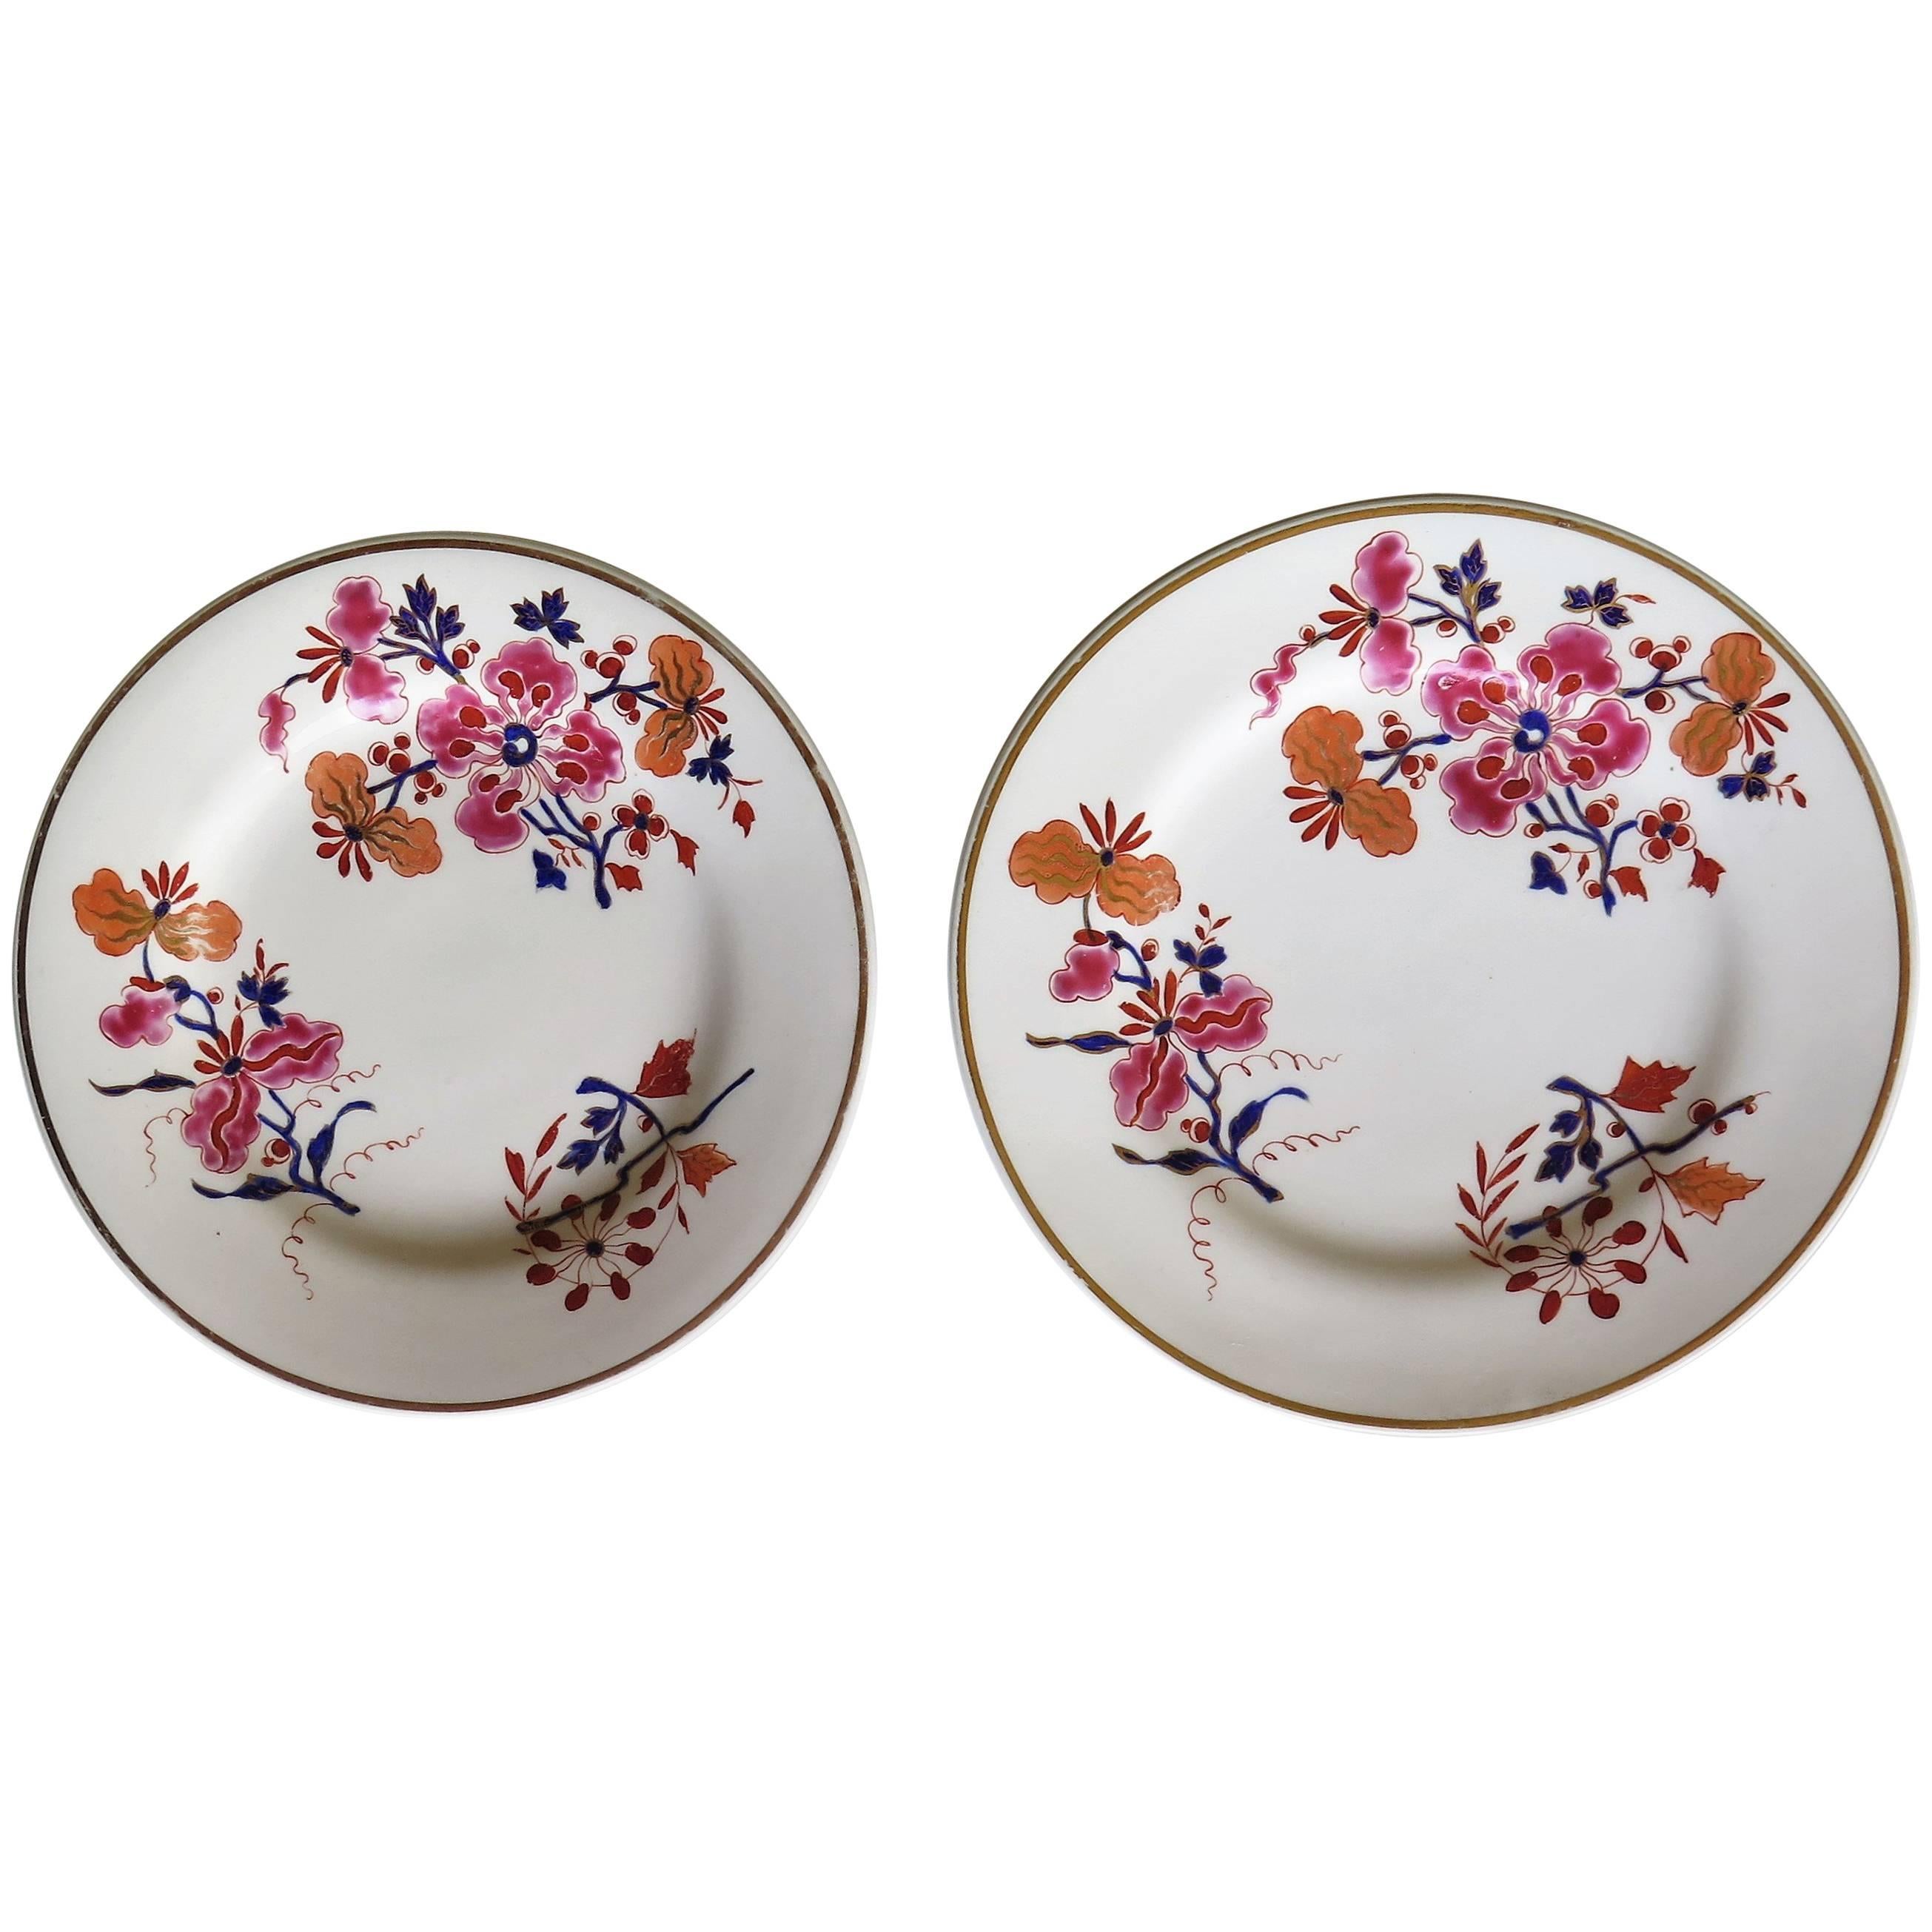 Pair of Worcester Flight Barr and Barr Plates Hand-Painted Flowers, circa 1825